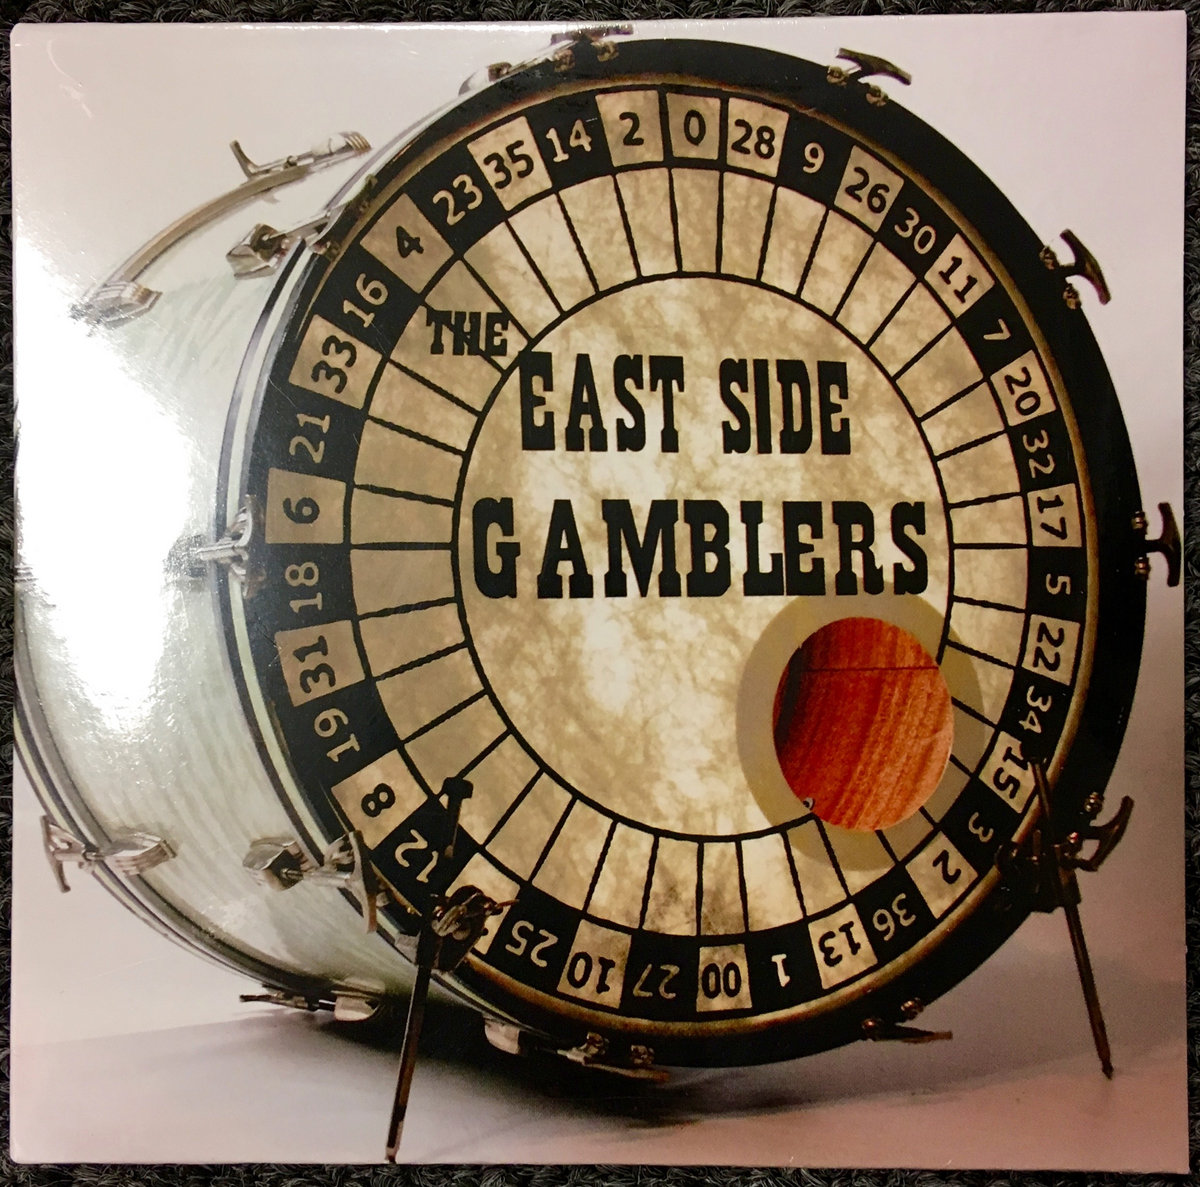 New Rock Covers:

The East Side Gamblers @tonyhigbee cover Alice Cooper's @alicecooper Schools Out #SchoolsOut #NewRockCovers #AliceCooper #TheEastSideGamblers

🎧 youtu.be/u83-yIpLqbk